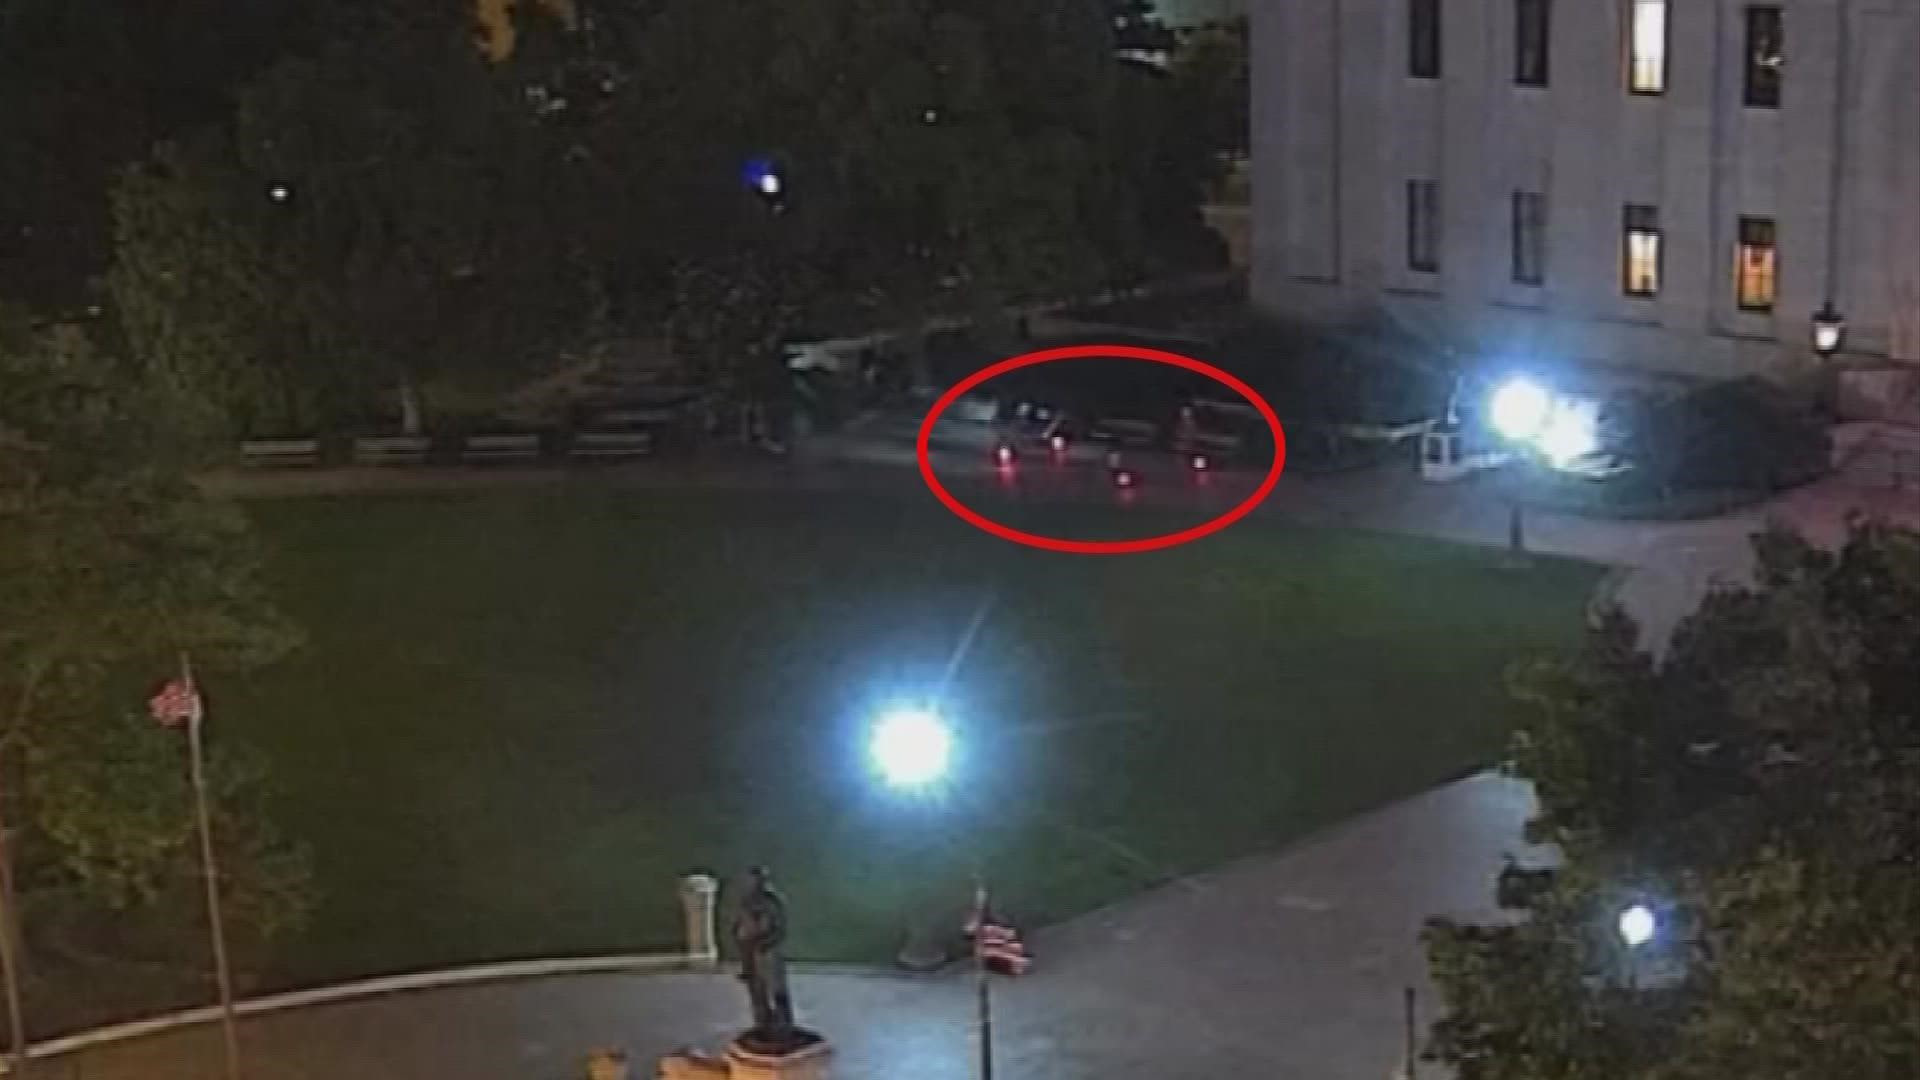 Authorities said a man was shot and killed on the lawn of the Ohio Statehouse Sunday night.